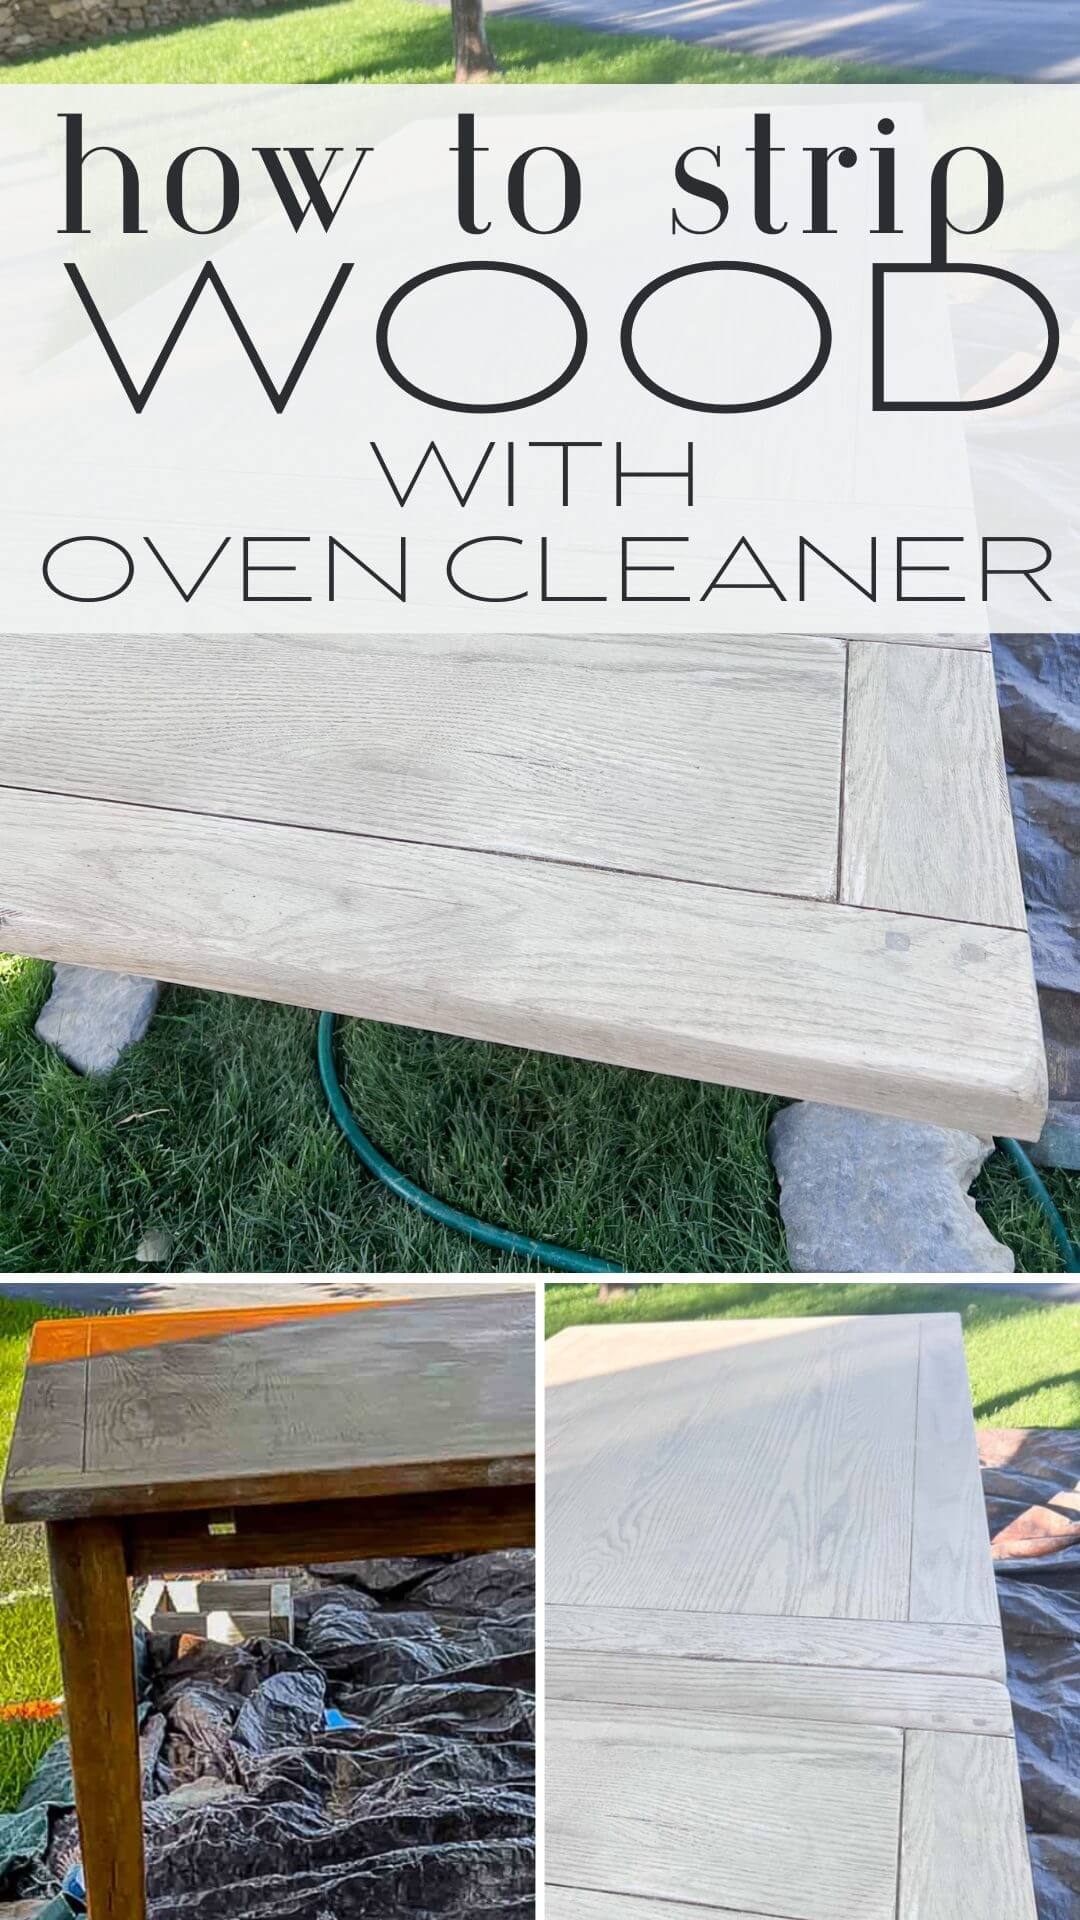 How to strip wood with oven cleaner with these easy steps. Oven cleaner on wood?  It works and its so easy! Check this DIY out.